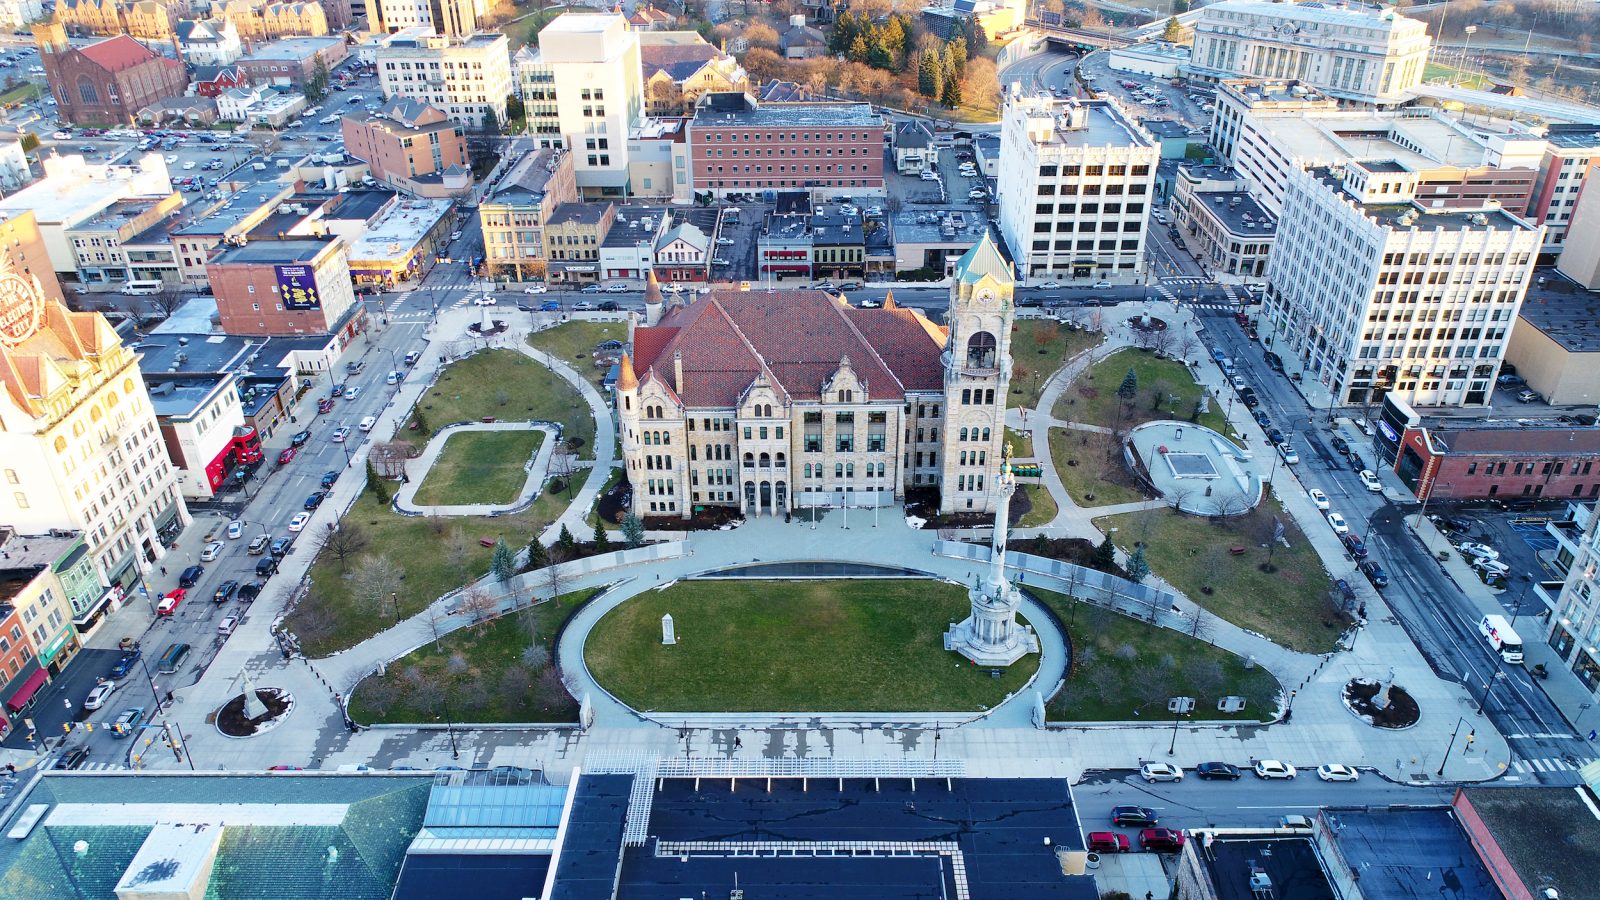 The Lackawanna County Courthouse seen from above